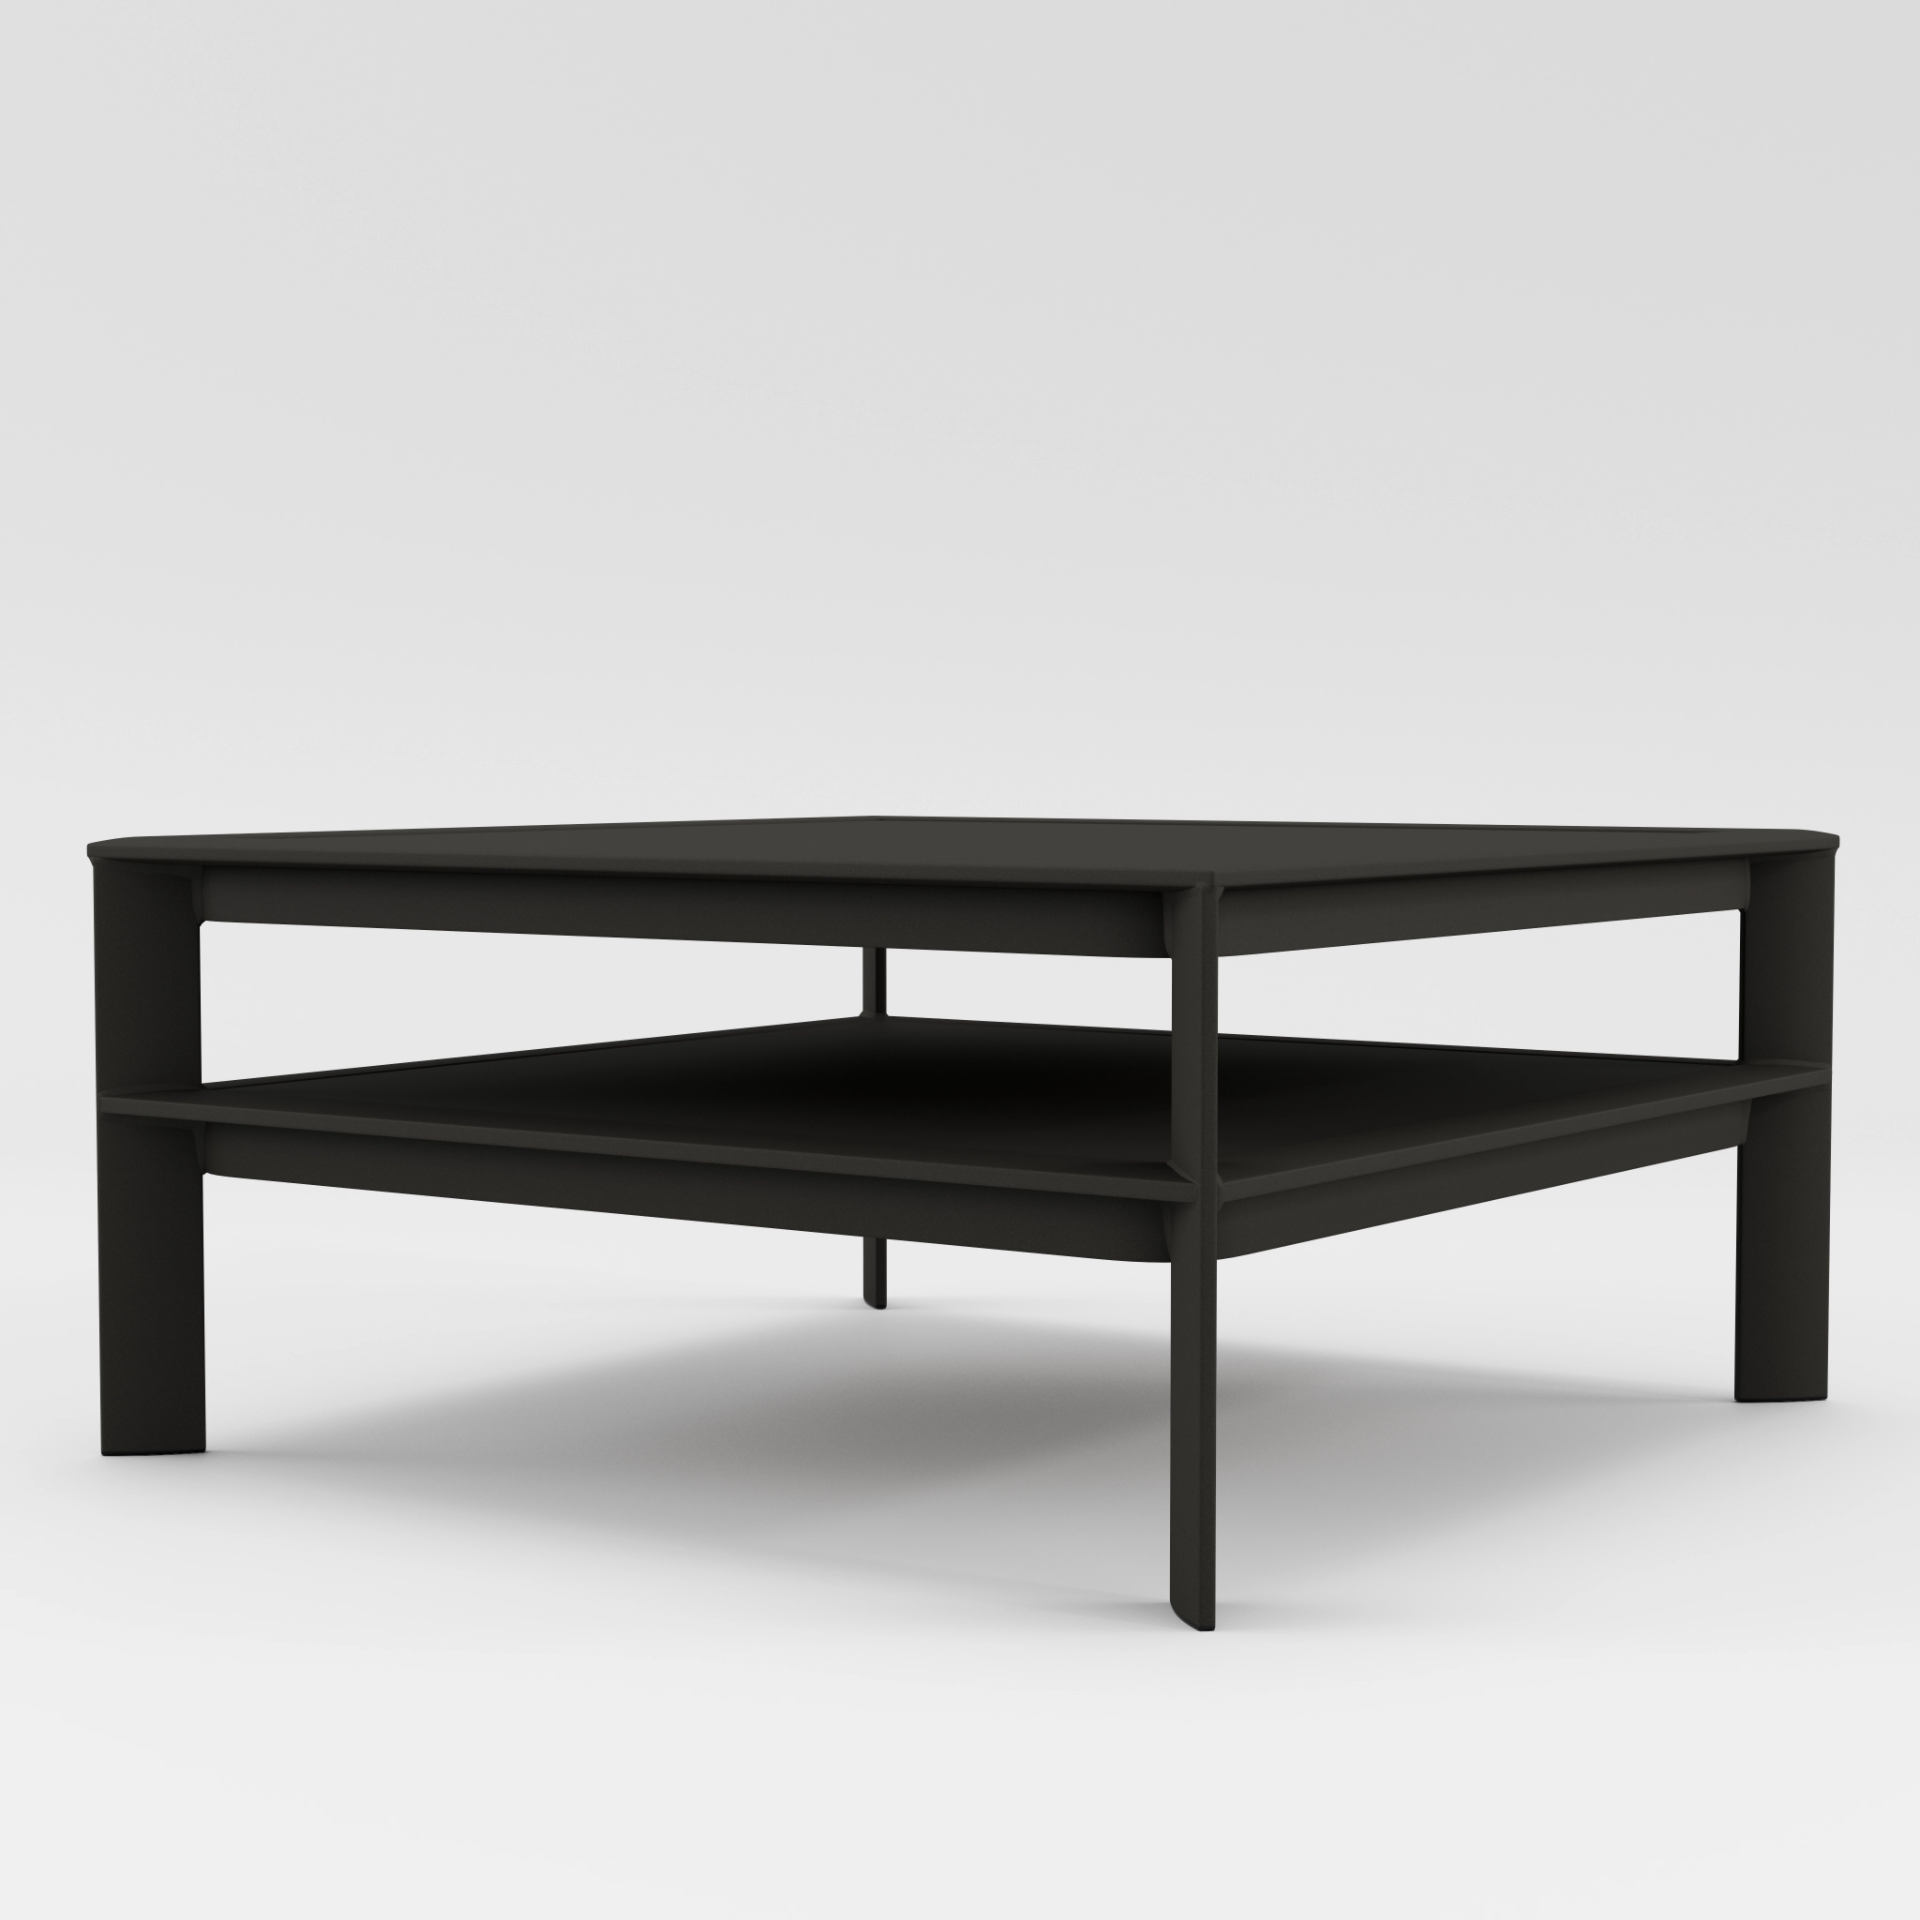 Parkway Modular 35" Square Occasional Table by Brown Jordan